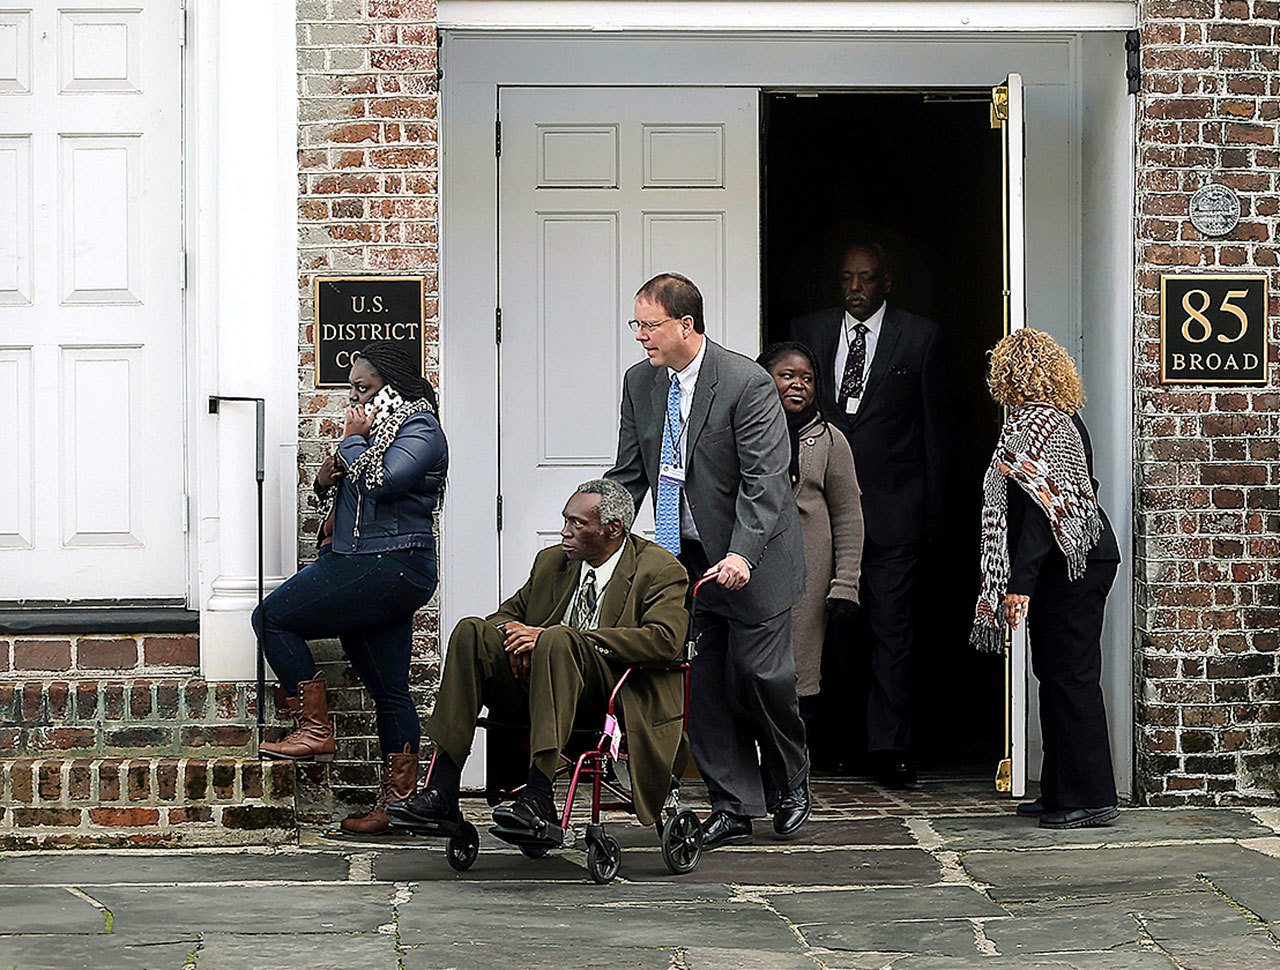 The Rev. Spike Coleman pushes John Pinckney, father of the Rev. Clementa Pinckney, one of the Emanuel Church shooting victims, as they leave the U.S. District Court on Tuesday, Jan. 10, in Charleston, South Carolina. (Grace Beahm/The Post And Courier via AP)